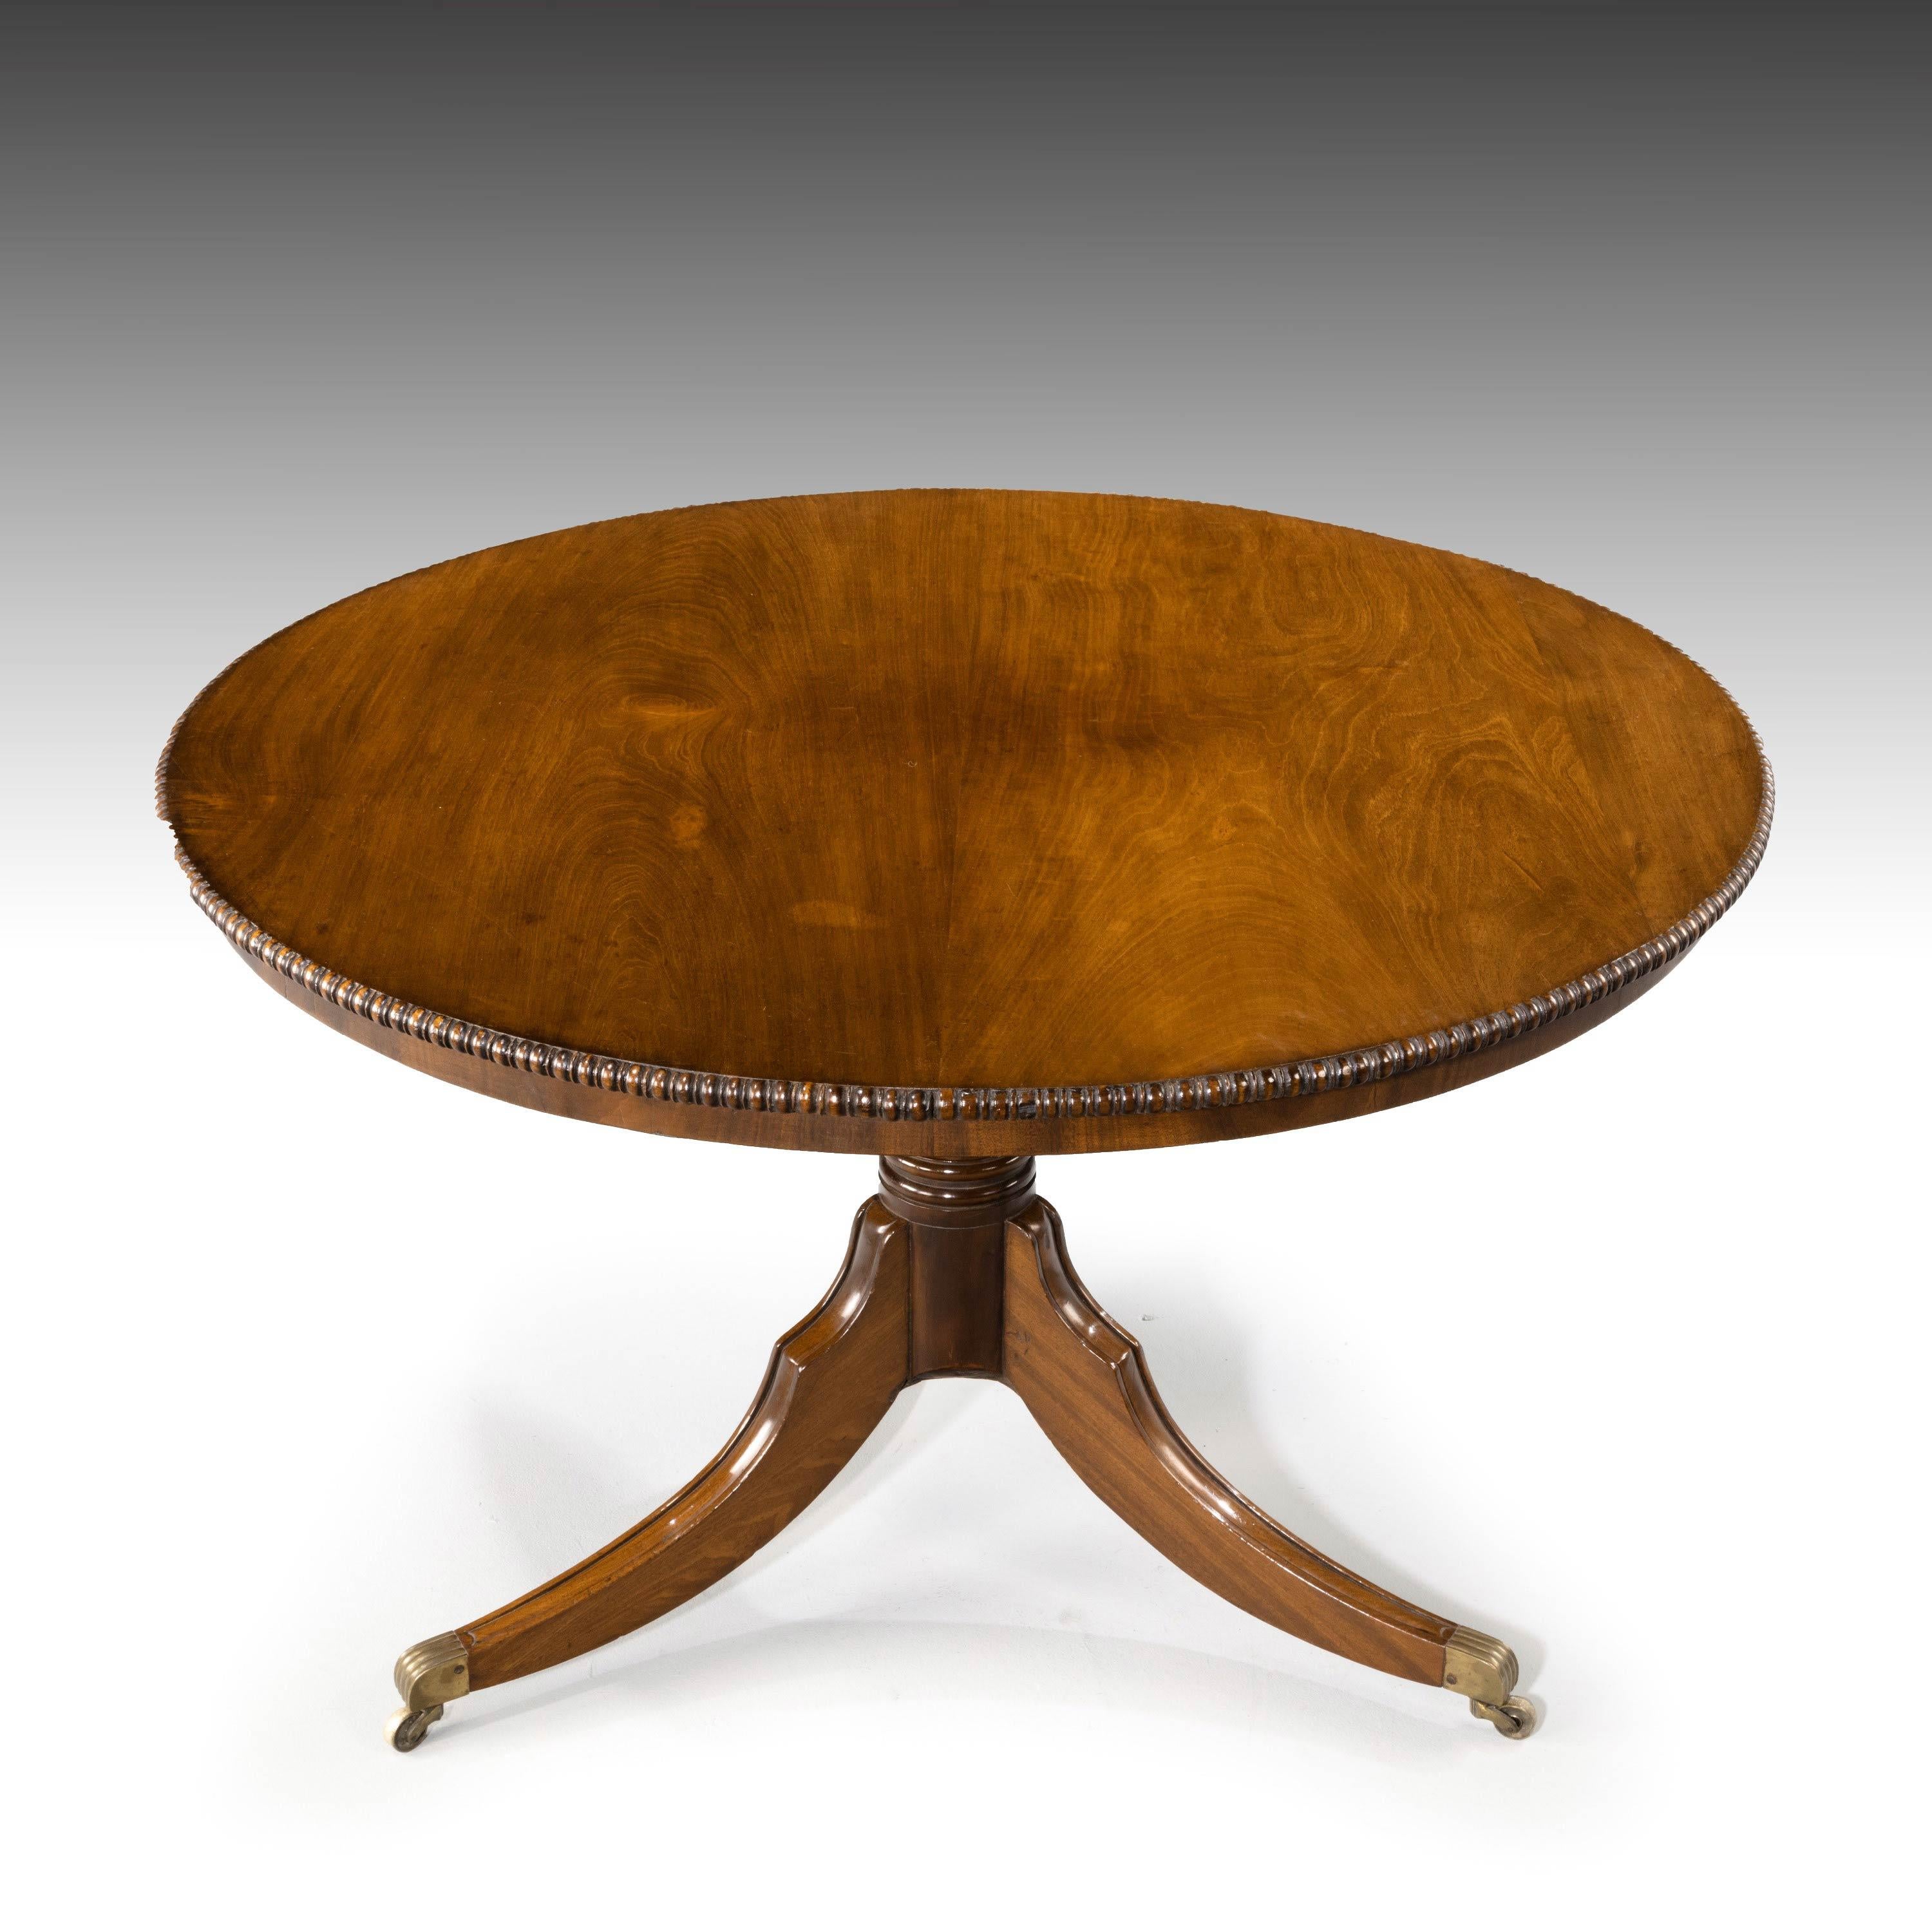 English Most Attractive Regency Period Tilt-Top Dining Table